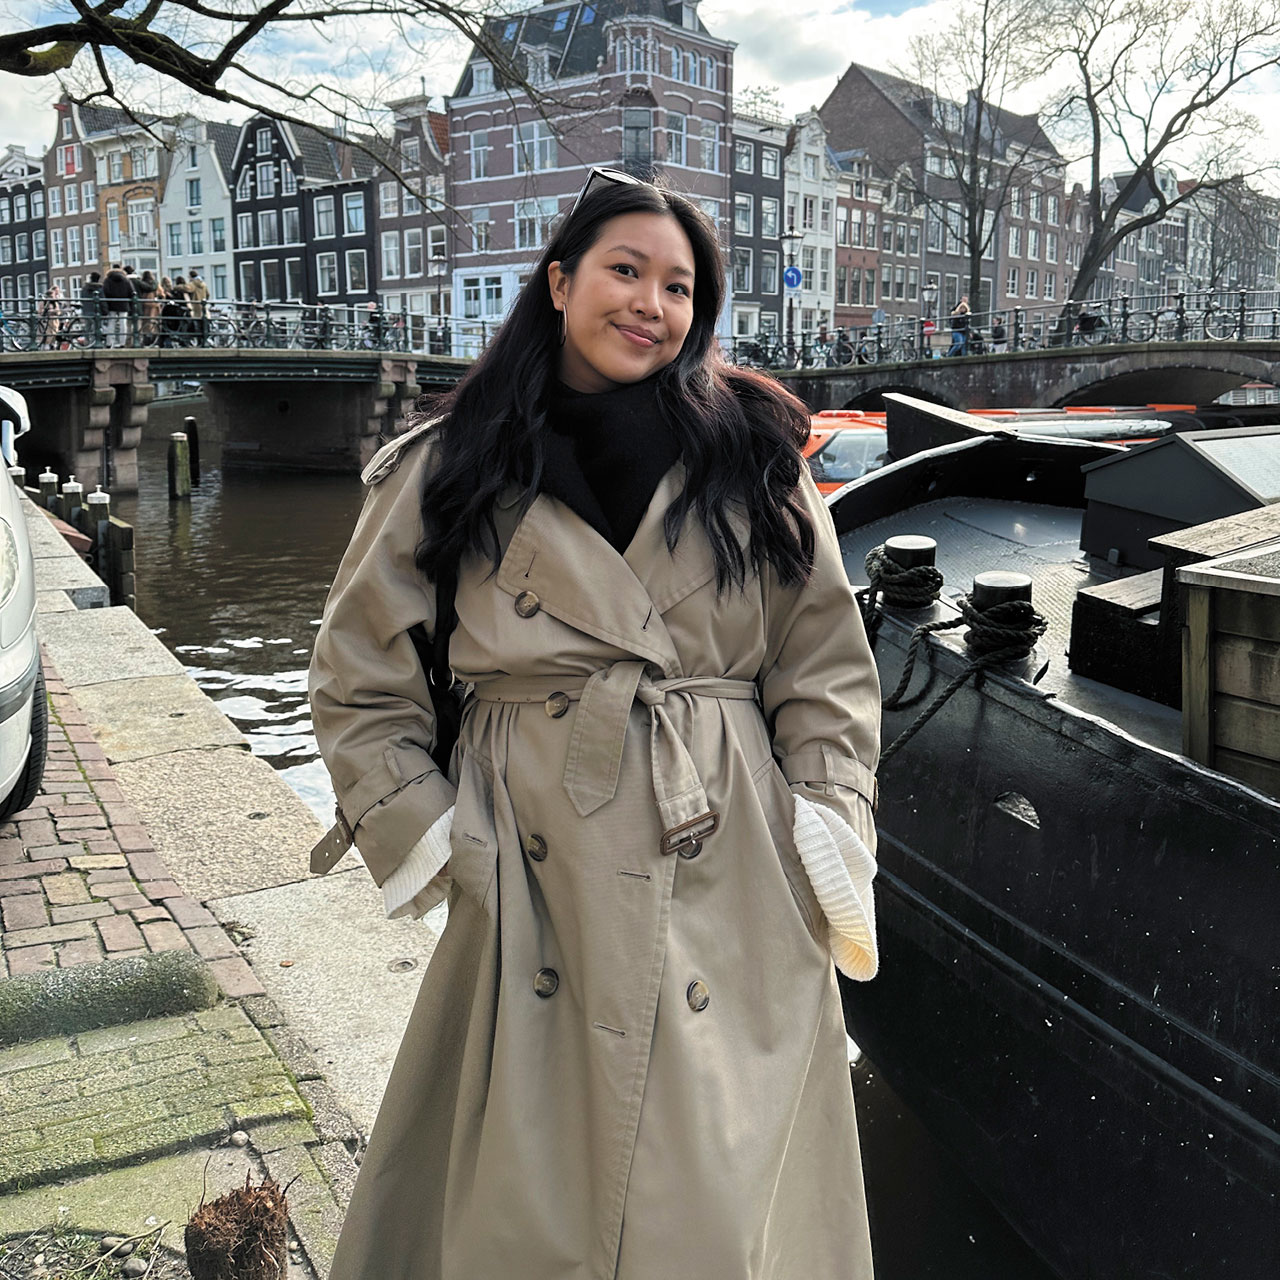 The writer in a trench coat by a canal